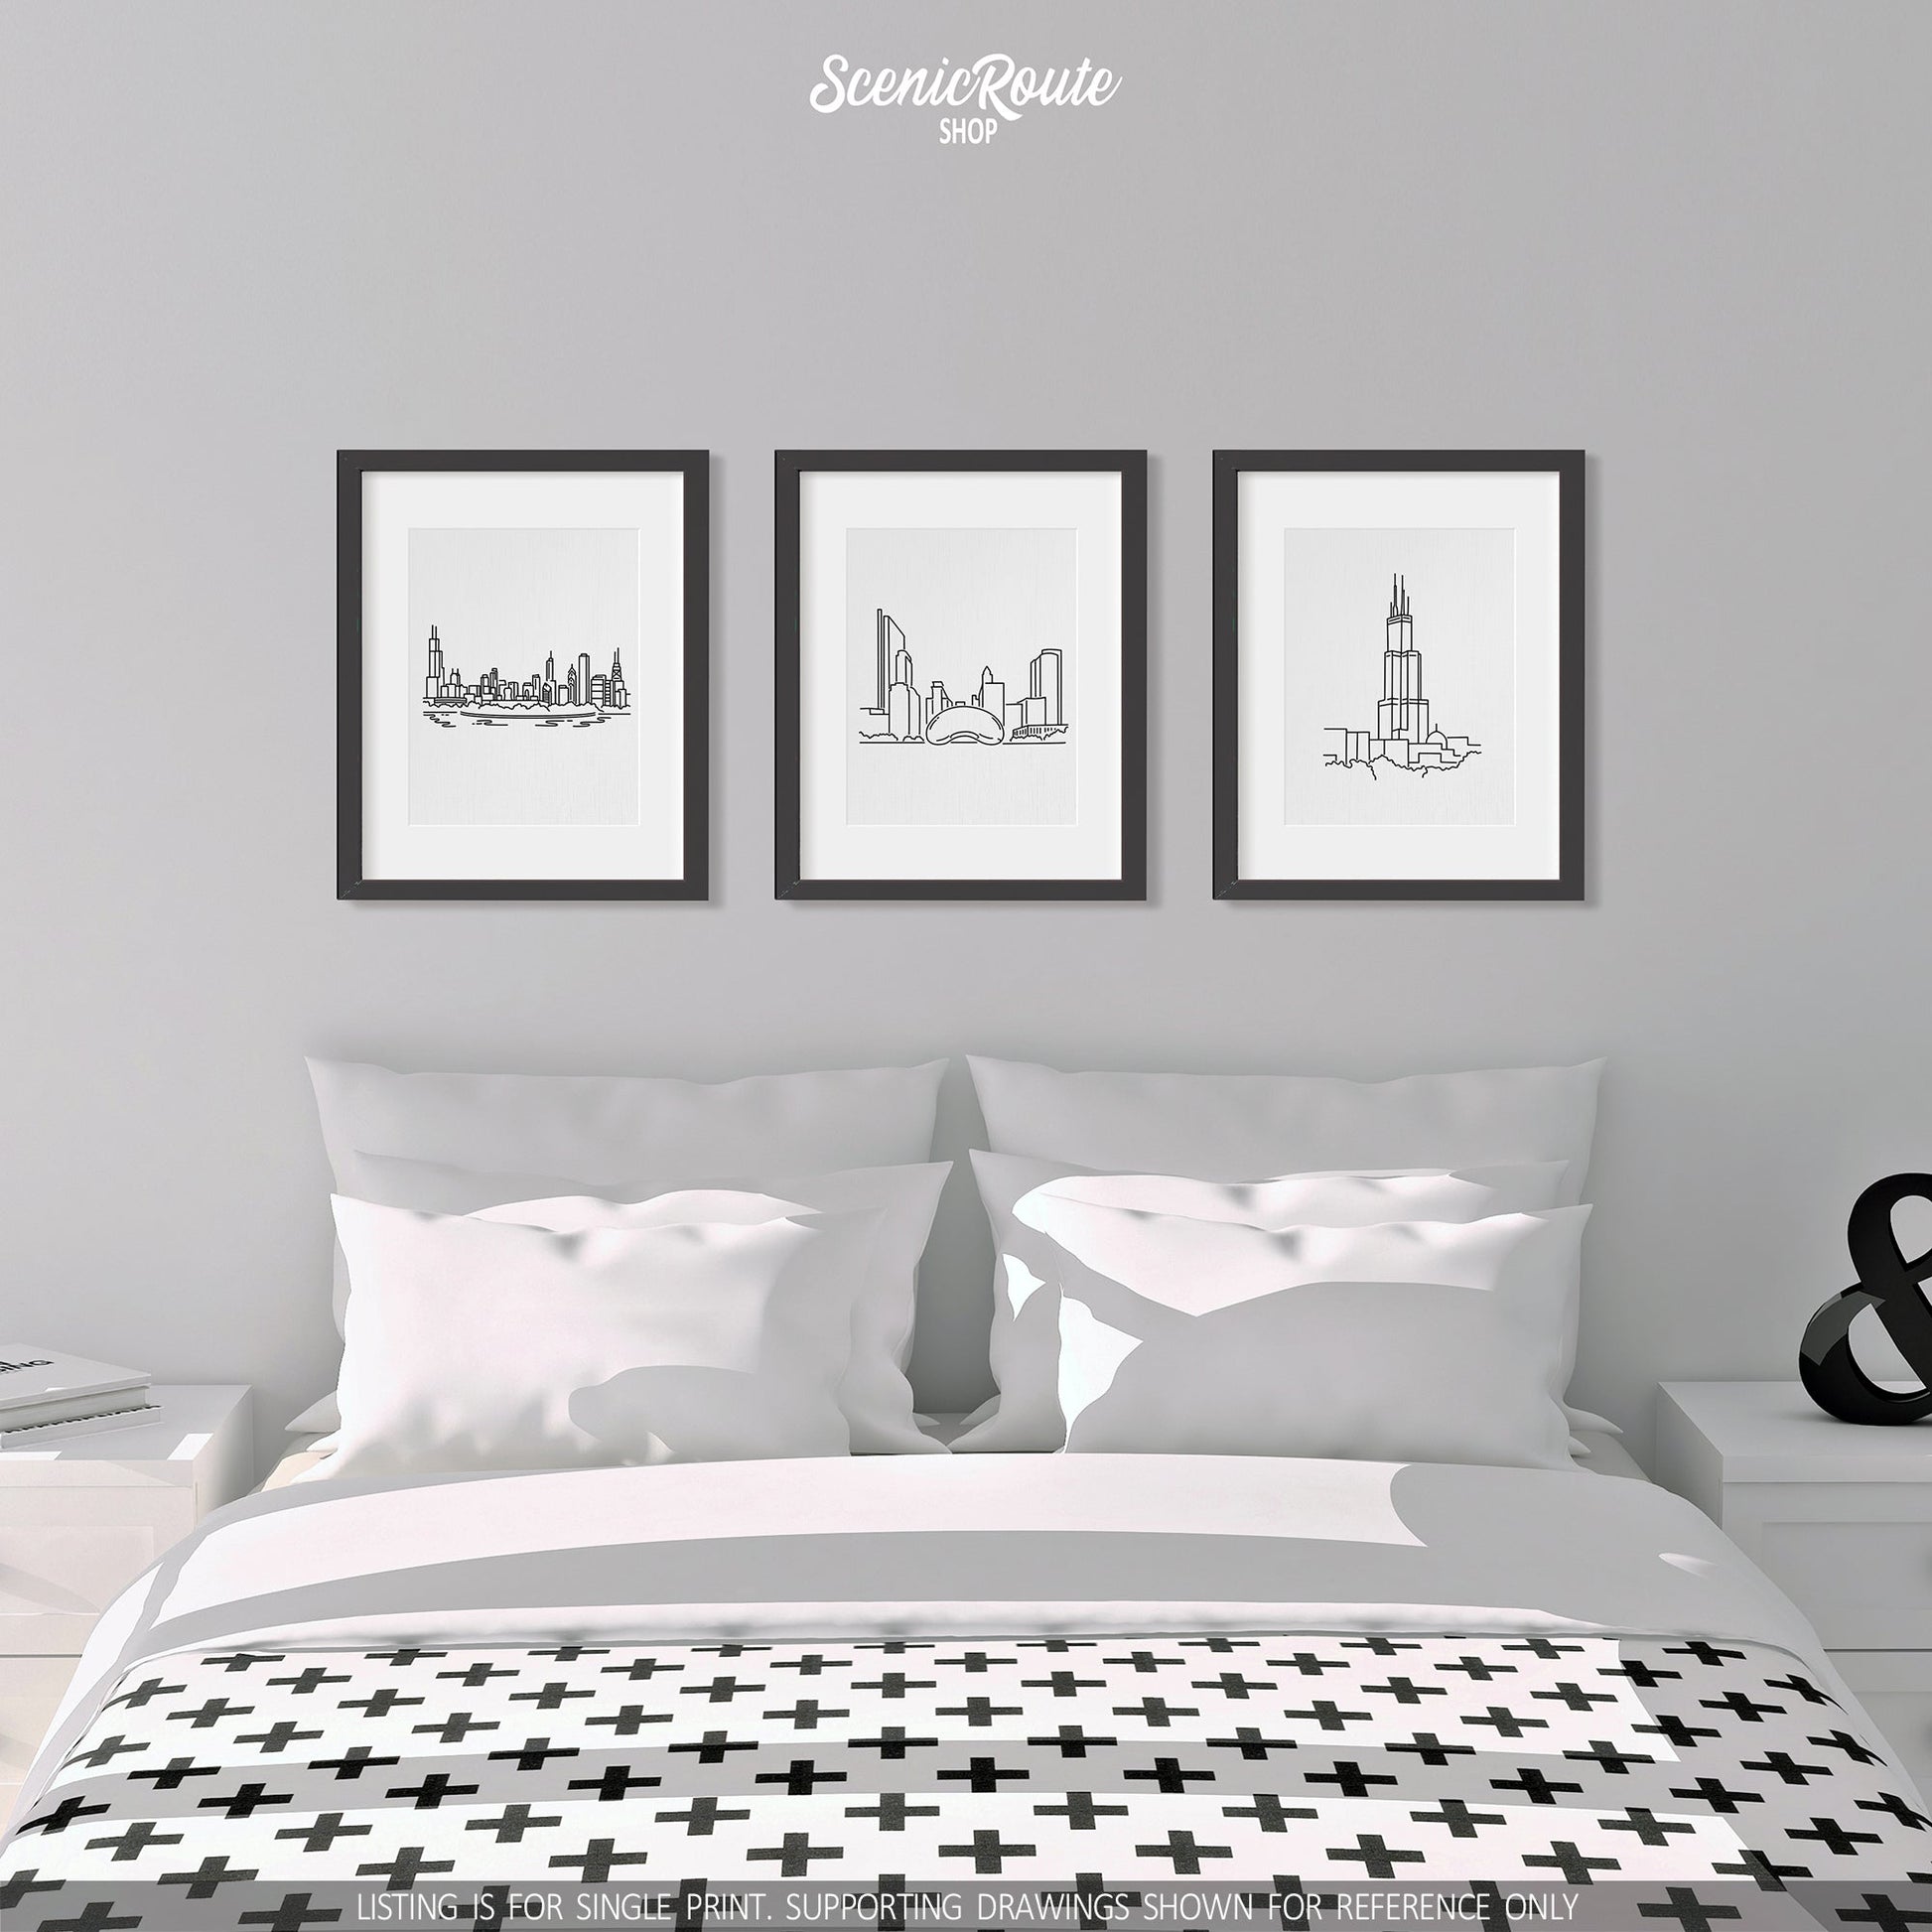 A group of three framed drawings on a white wall above a bed. The line art drawings include the Chicago Skyline, Chicago Bean Sculpture, and WIllis Sears Tower